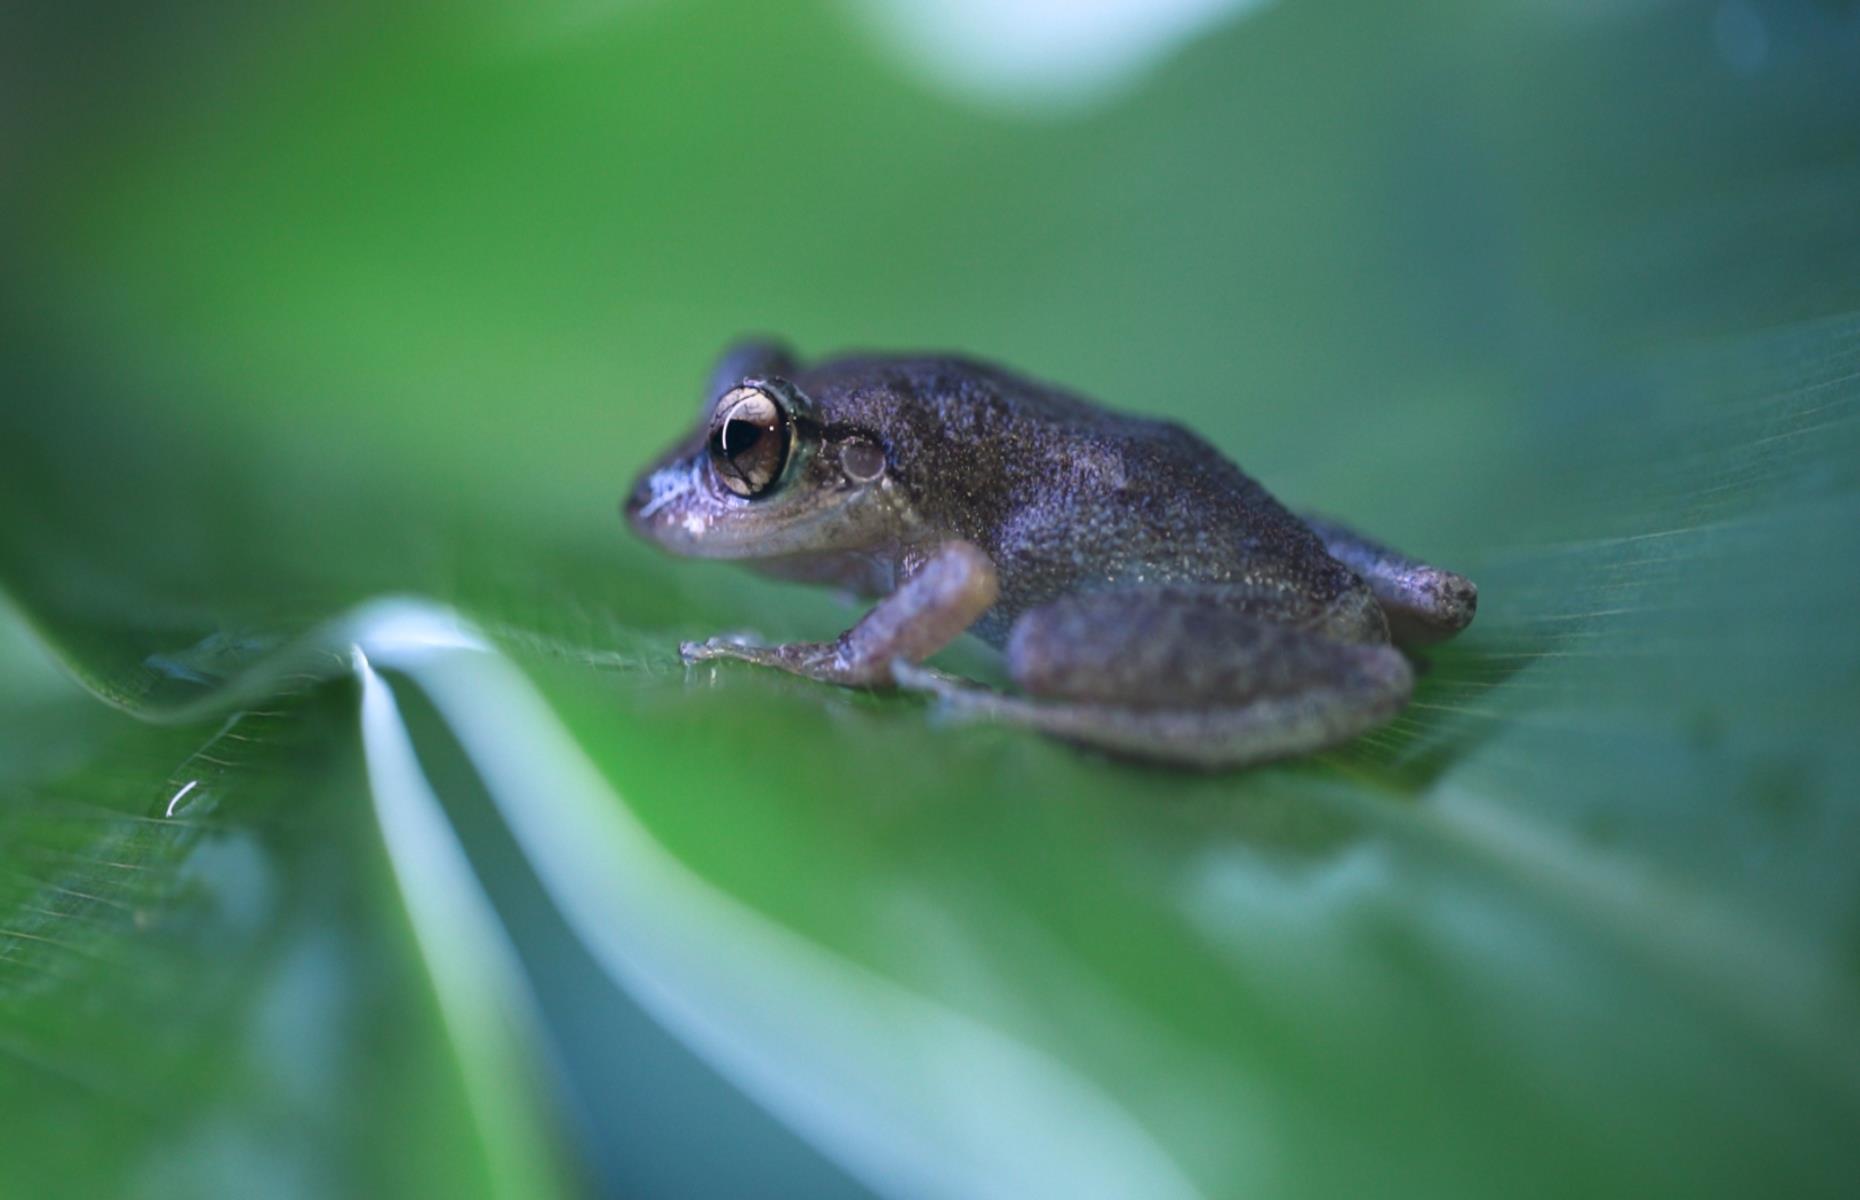 <p>When night falls in Puerto Rico, the territory's mountains and forests ring with the mating calls of thousands of coquí tree frogs. Named after their distinctive, uplifting song, which sounds like “Co-Kee! Co-Kee!”, the amphibians inhabited the archipelago long before the indigenous Taíno people immortalized their image in petroglyphs thousands of years ago. The coquí remains a much-loved cultural symbol for Puerto Ricans today, with the little frogs’ image found on everything from pottery to postcards.</p>